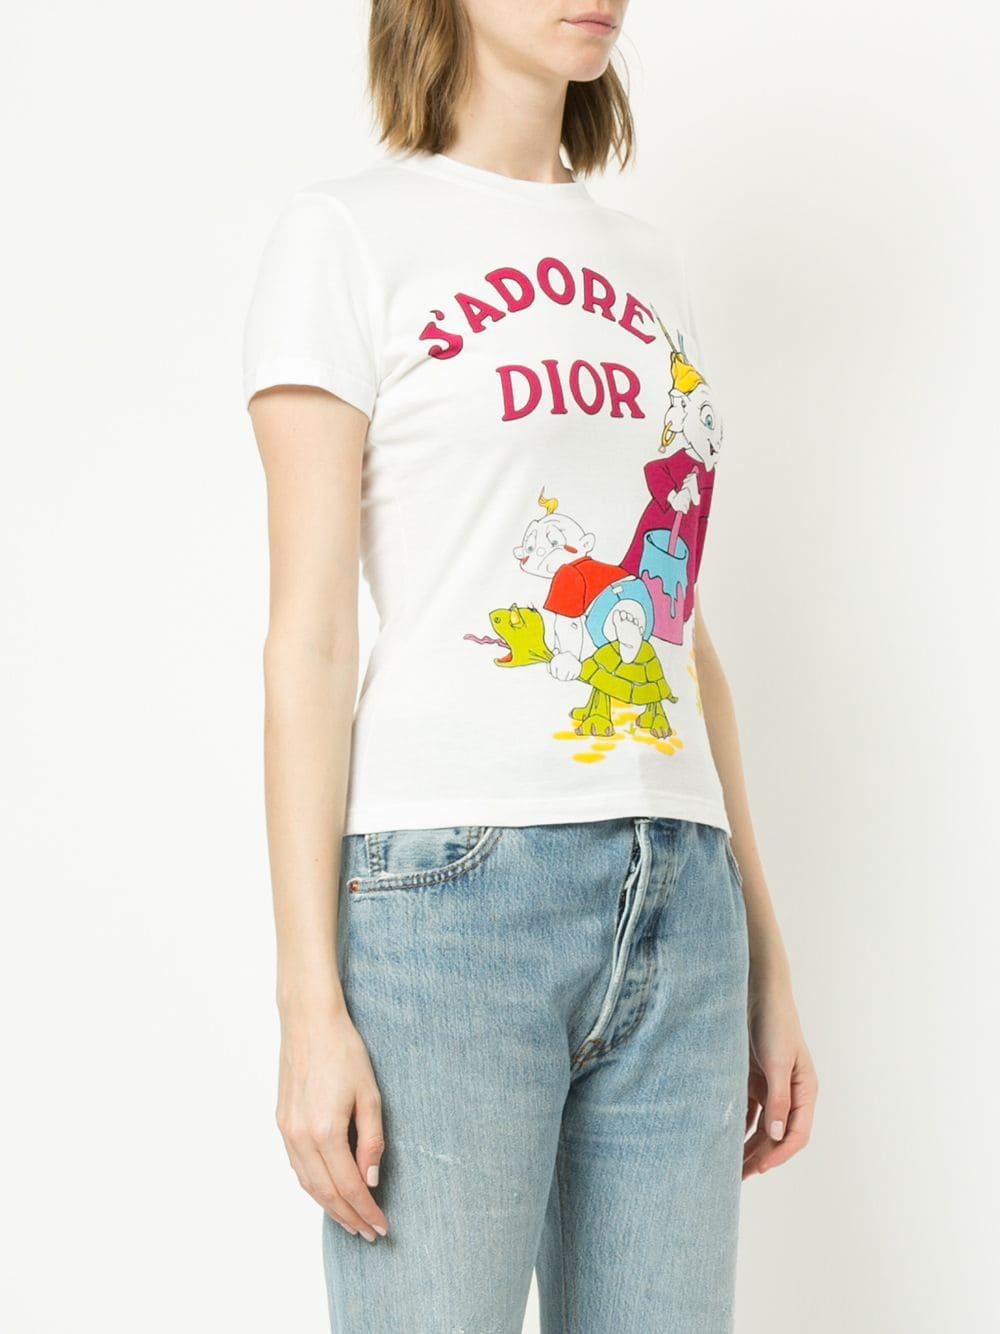 Christian Dior Pre-Owned J'adore Dior T-shirt in White | Lyst